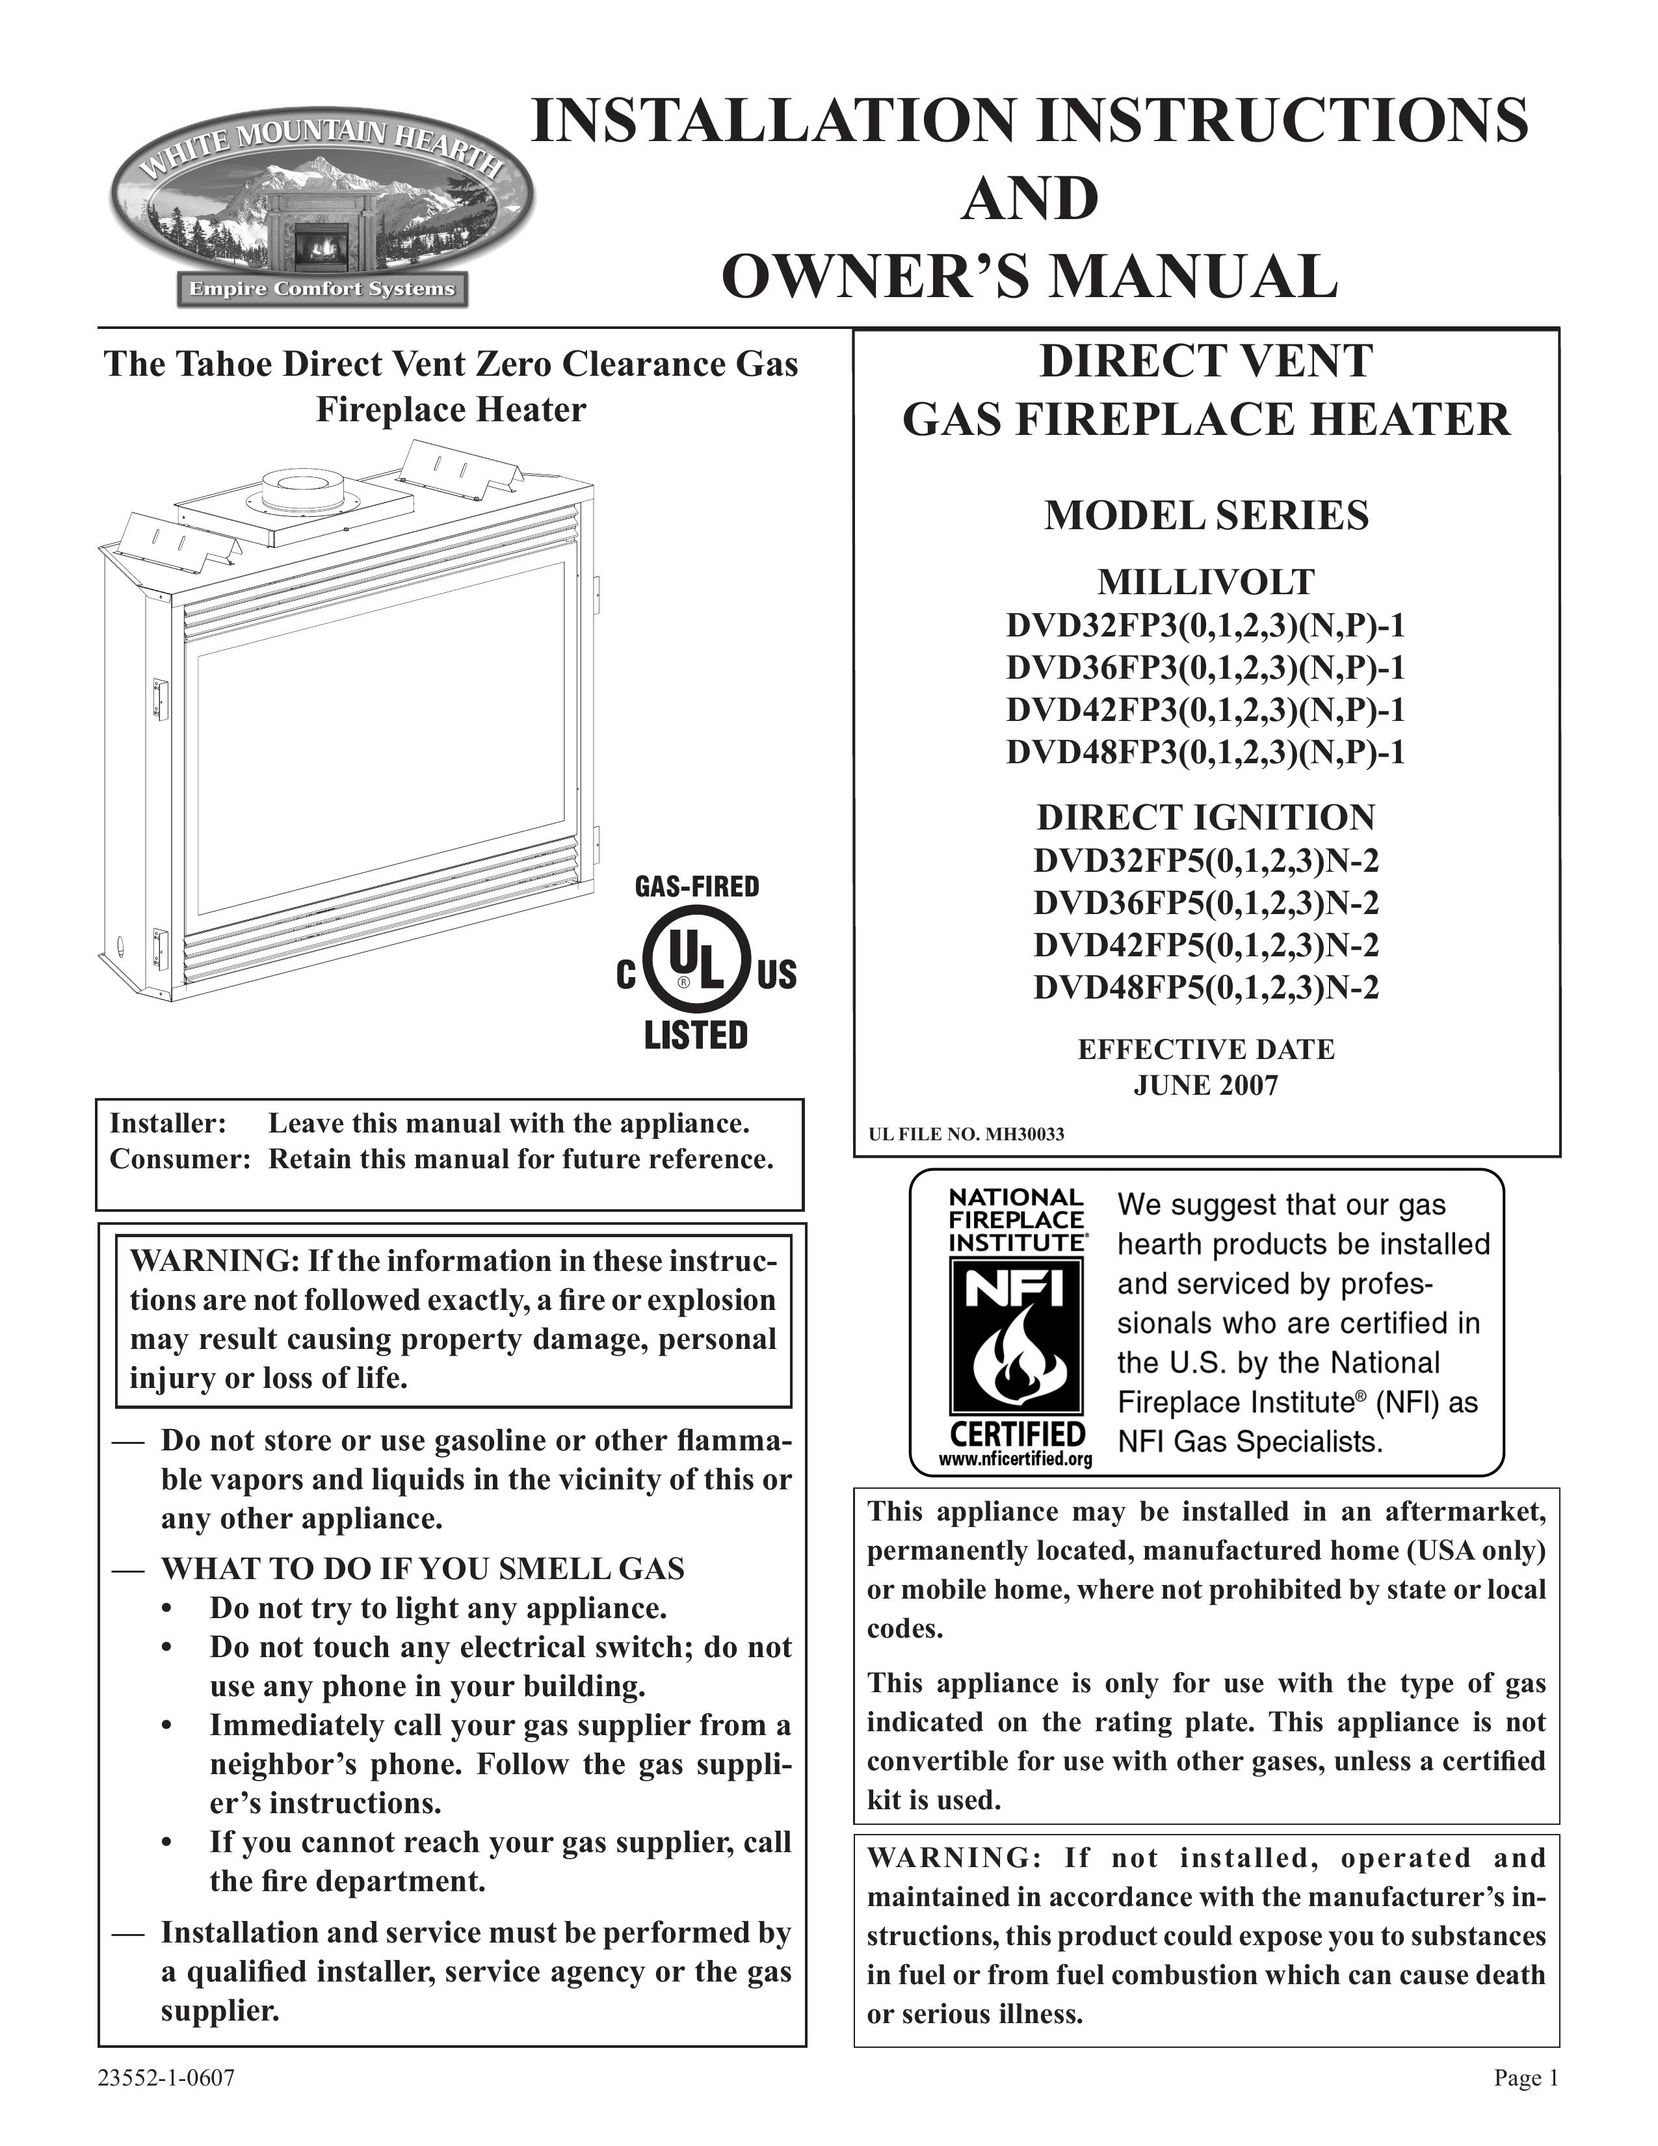 Empire Comfort Systems DVD48FP5 Indoor Fireplace User Manual